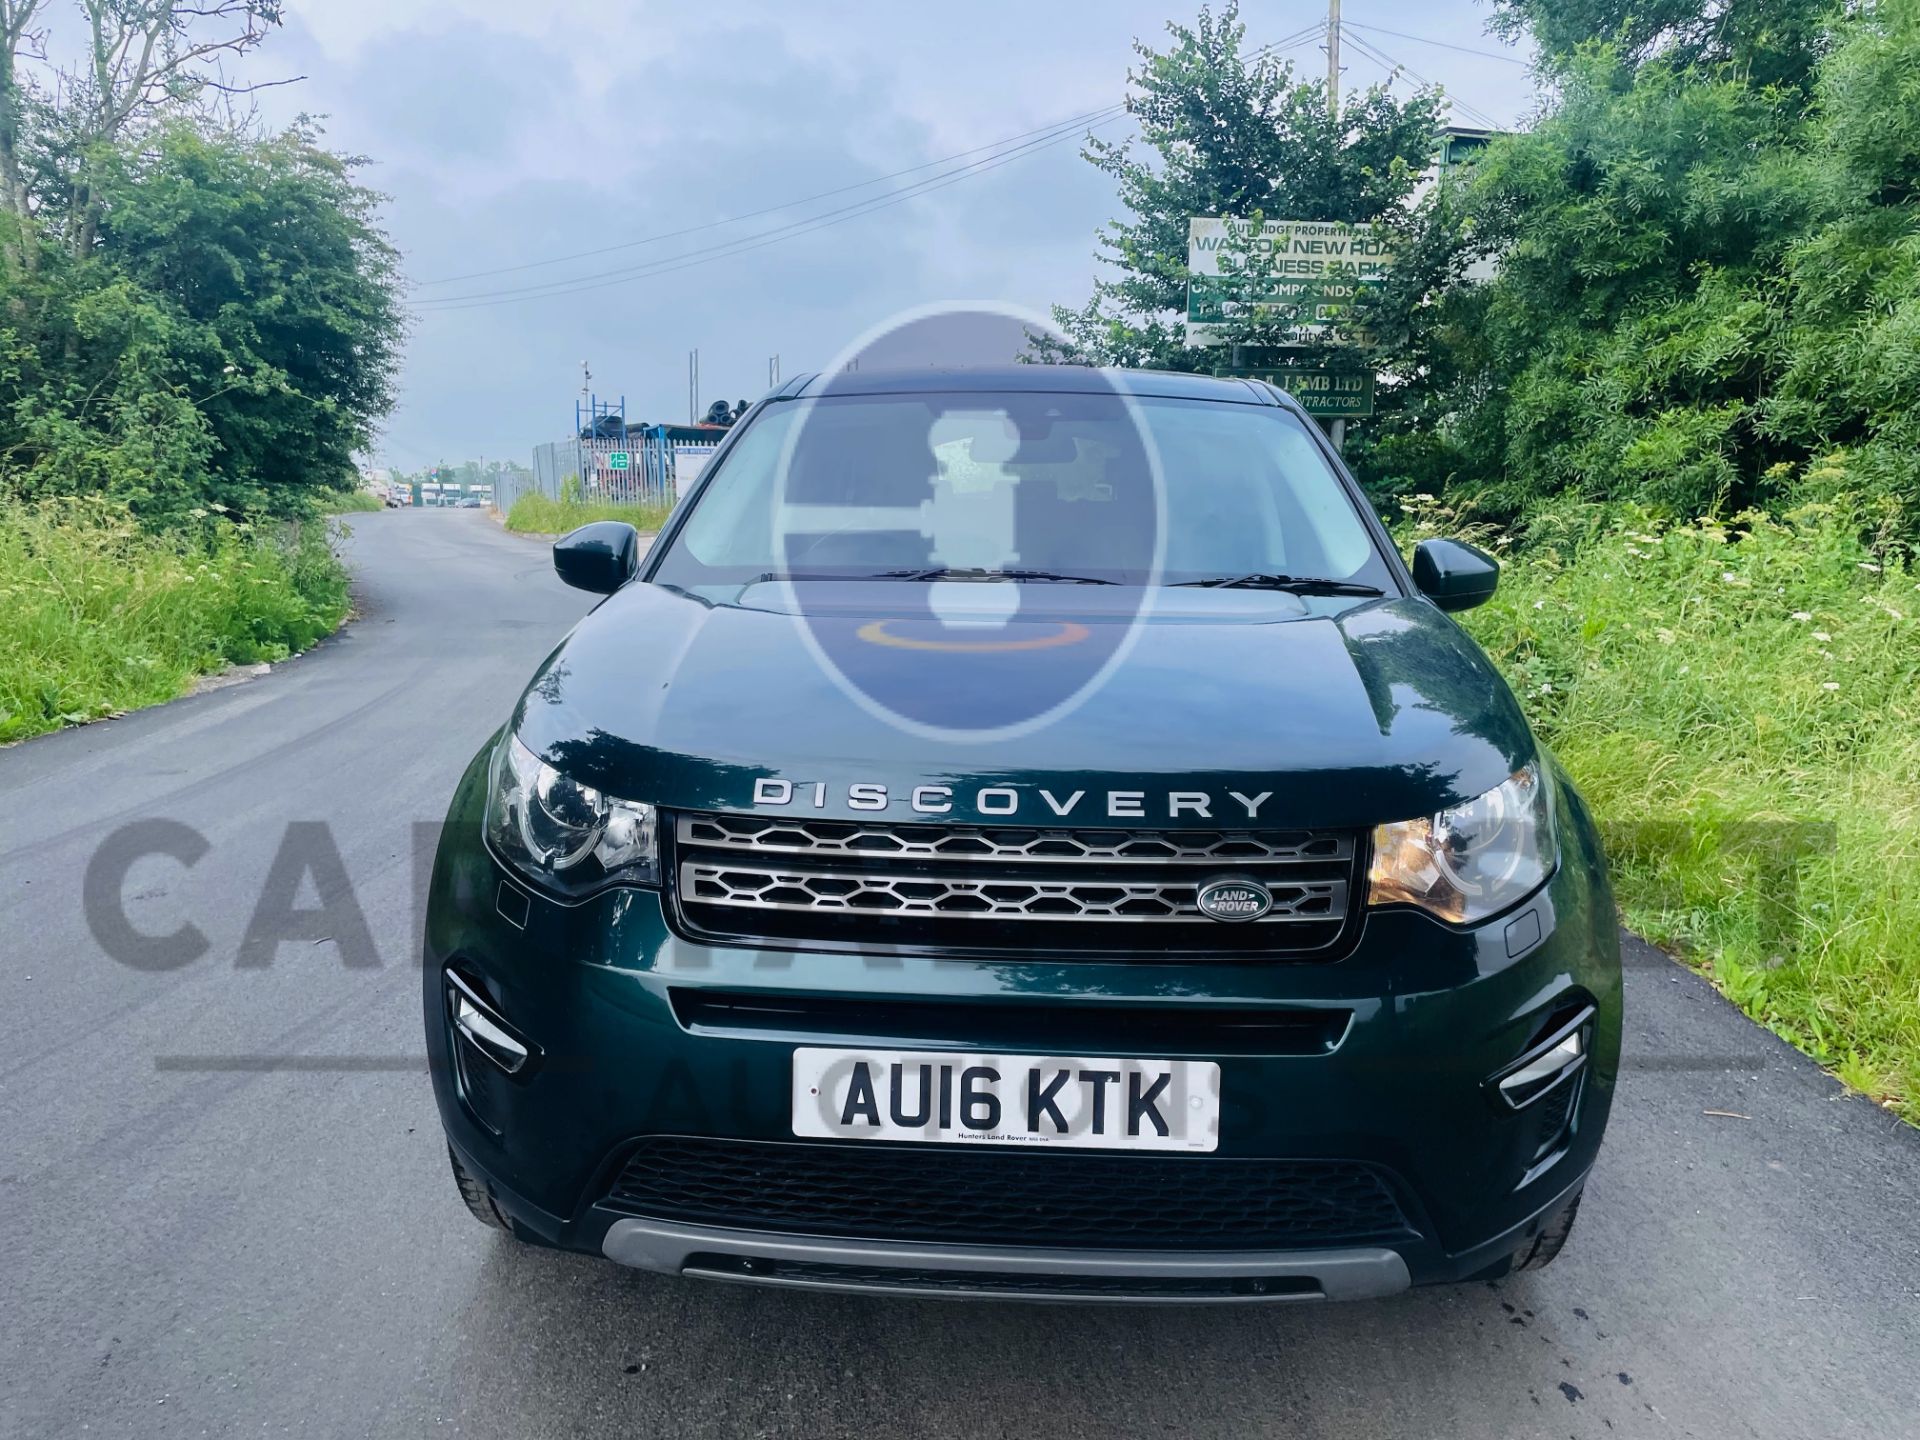 LAND ROVER DISCOVERY SPORT *SE TECH* 7 SEATER SUV (2016) 2.0 TD4 - AUTO *LEATHER & NAV* (NO VAT) - Image 4 of 54